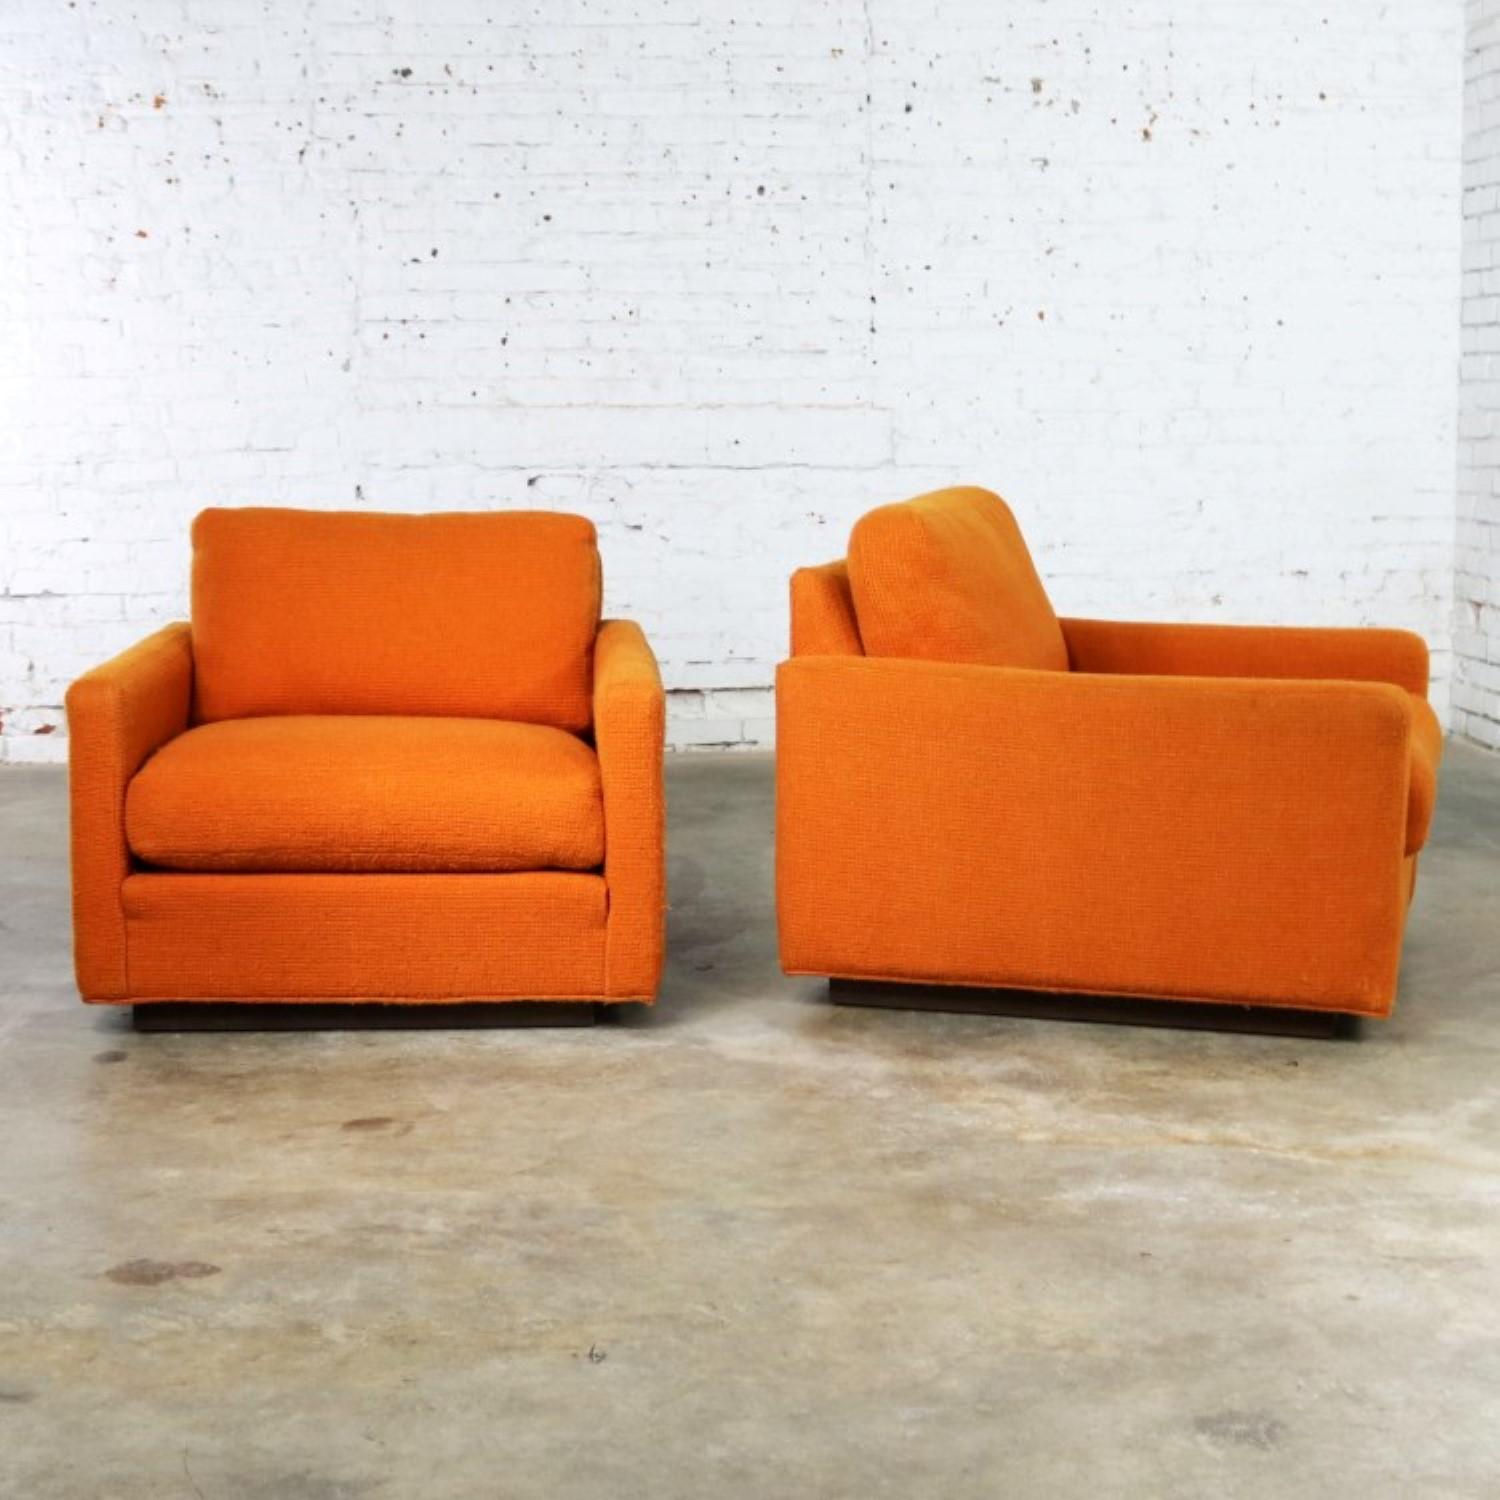 Handsome pair of cube Lawson style lounge chairs by Thayer Coggin attributed to Milo Baughman. They retain their original orange hopsack fabric. They are in wonderful vintage condition. We have shampooed them, and they can be used as is. However,